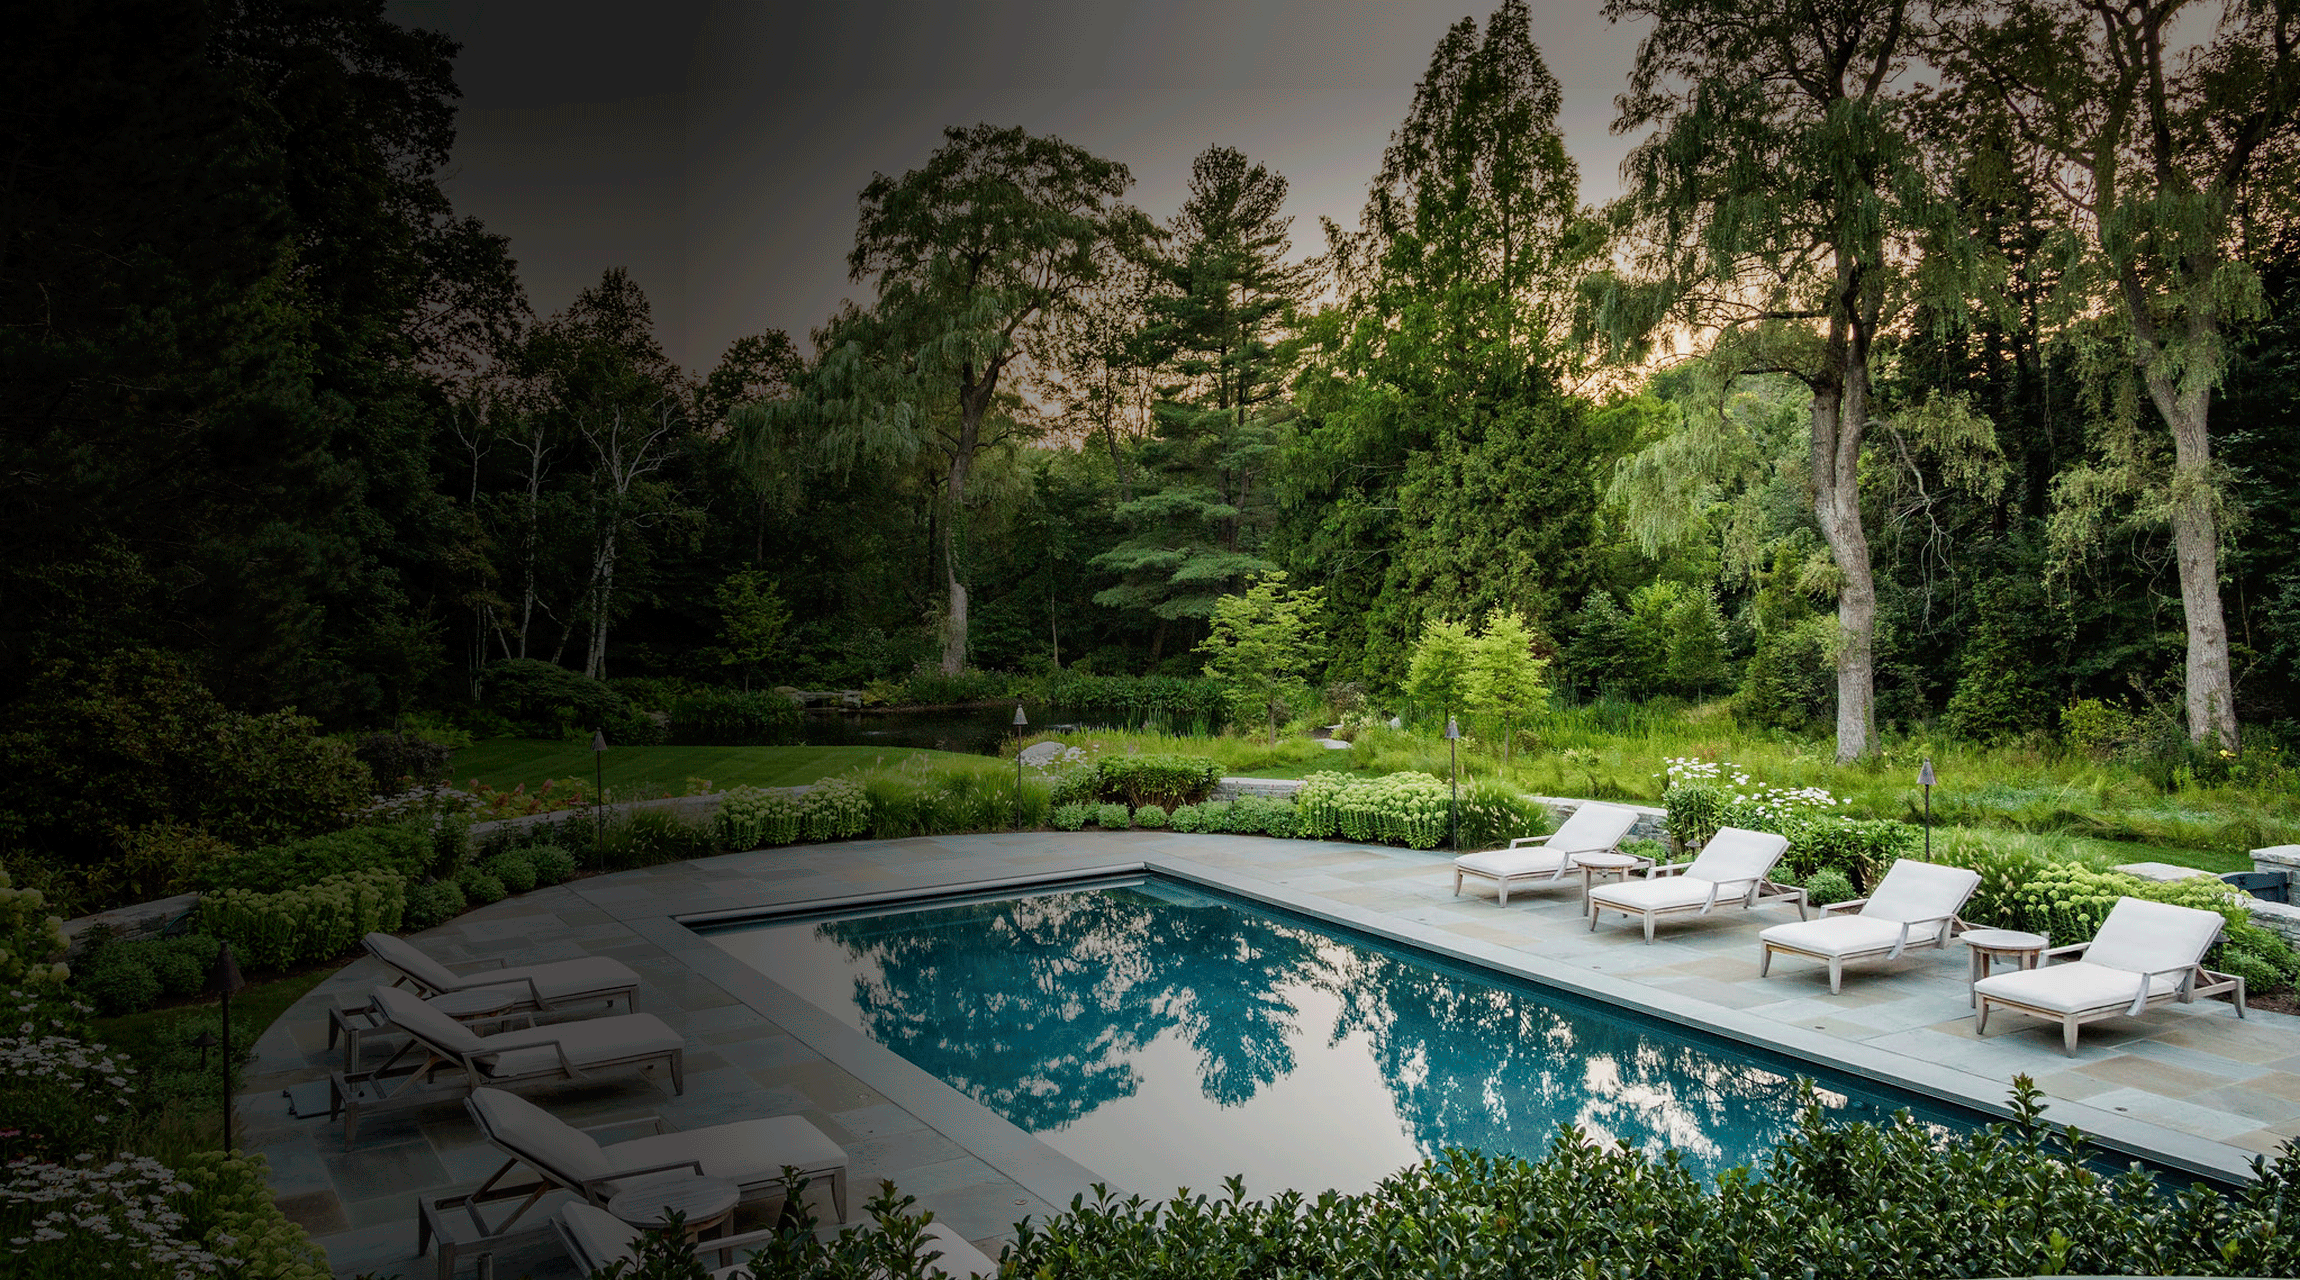 An outdoor swimming pool surrounded by lounge chairs, with reflecting trees, under a dusky sky nestled within a lush, landscaped garden.